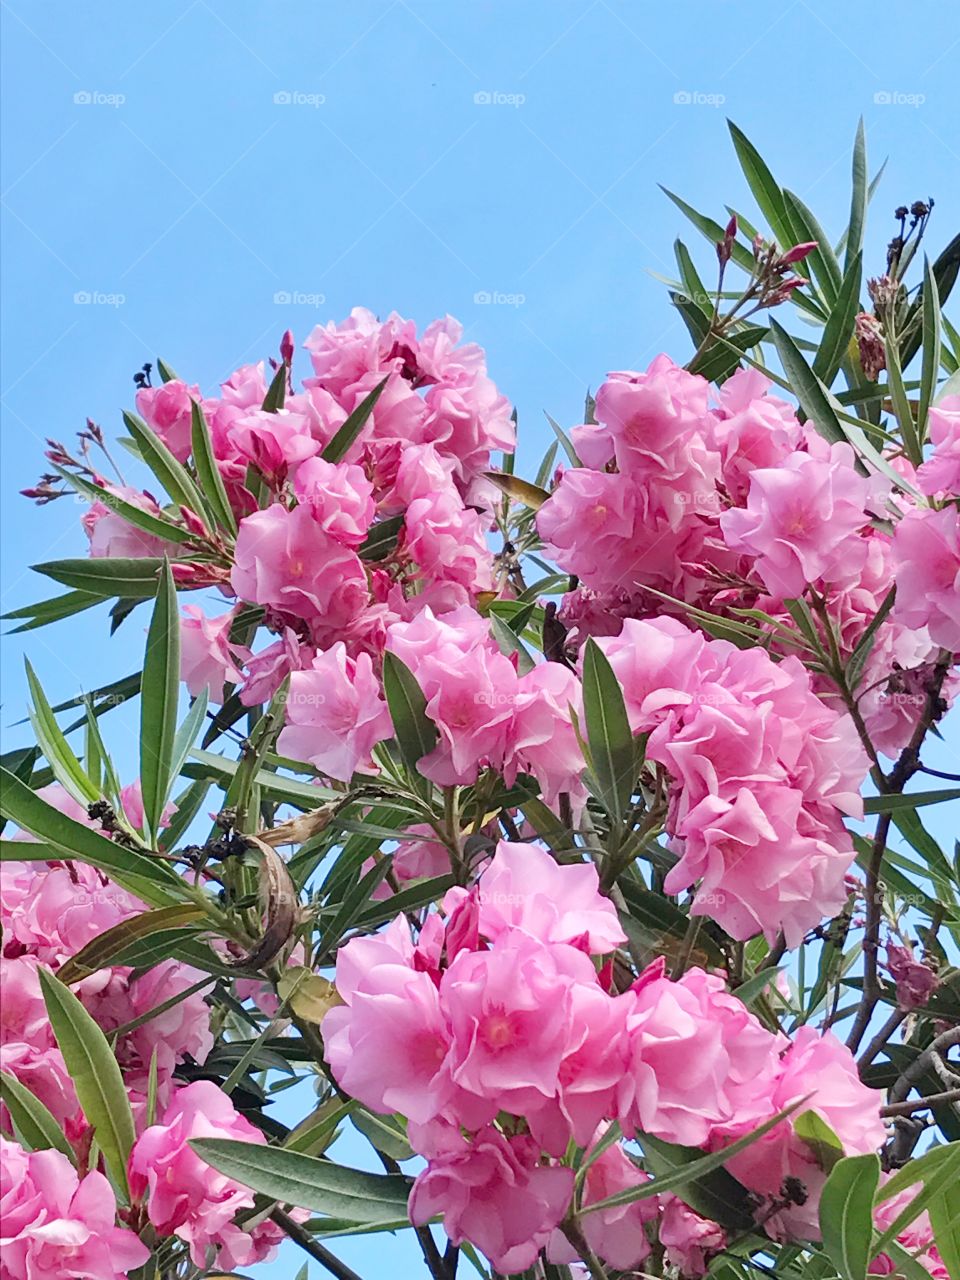 Pink Oleander flowers with green leaves against blue sky background